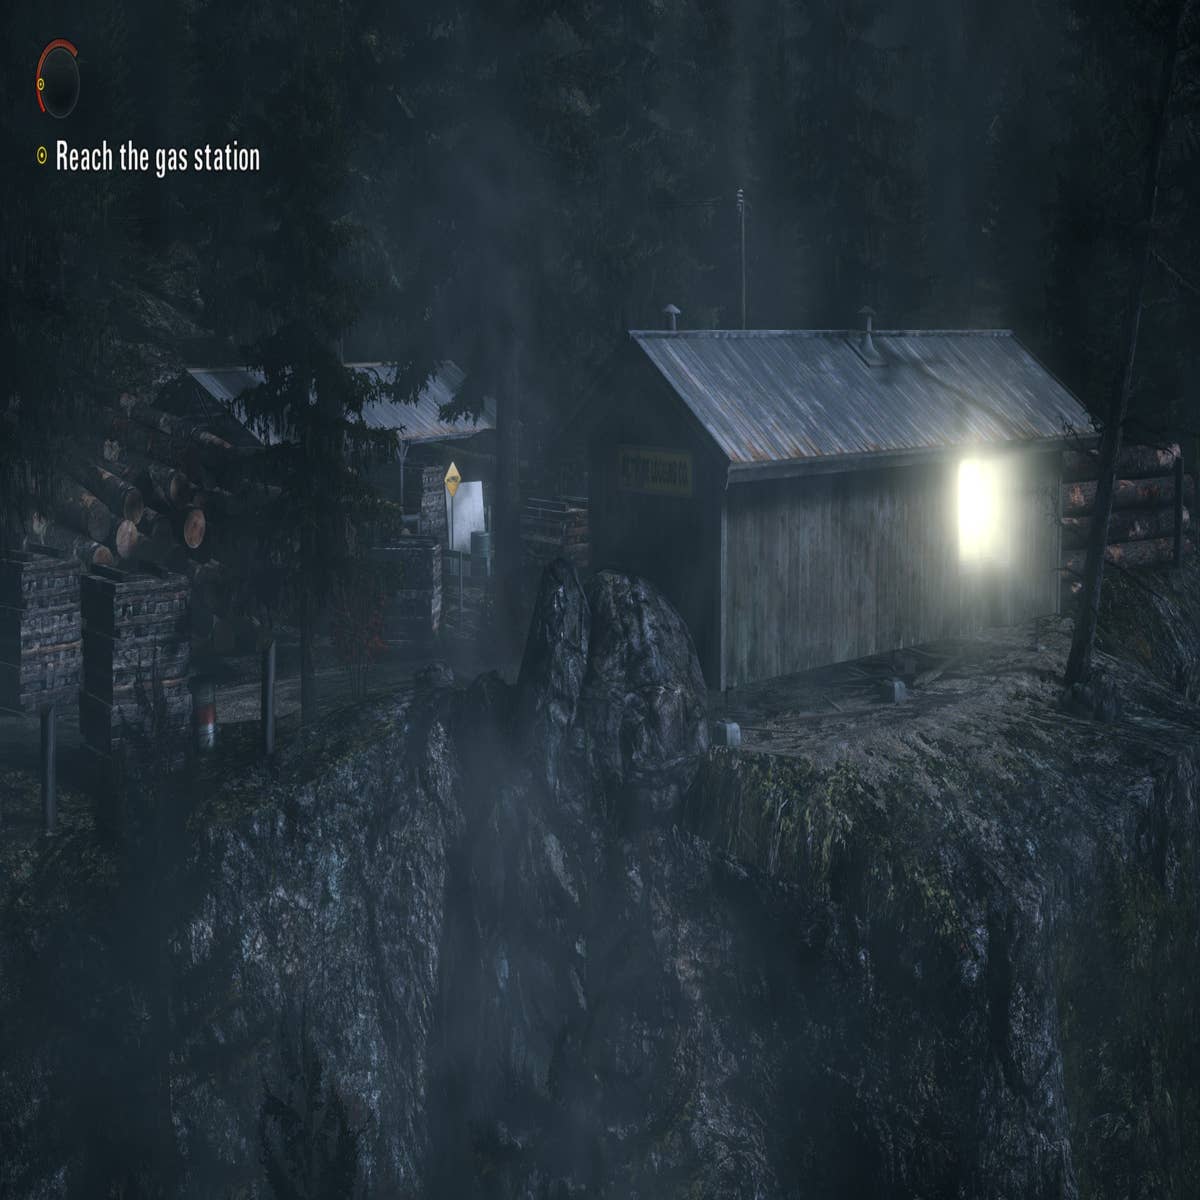 Alan Wake Remastered highlights gaming's preservation challenges